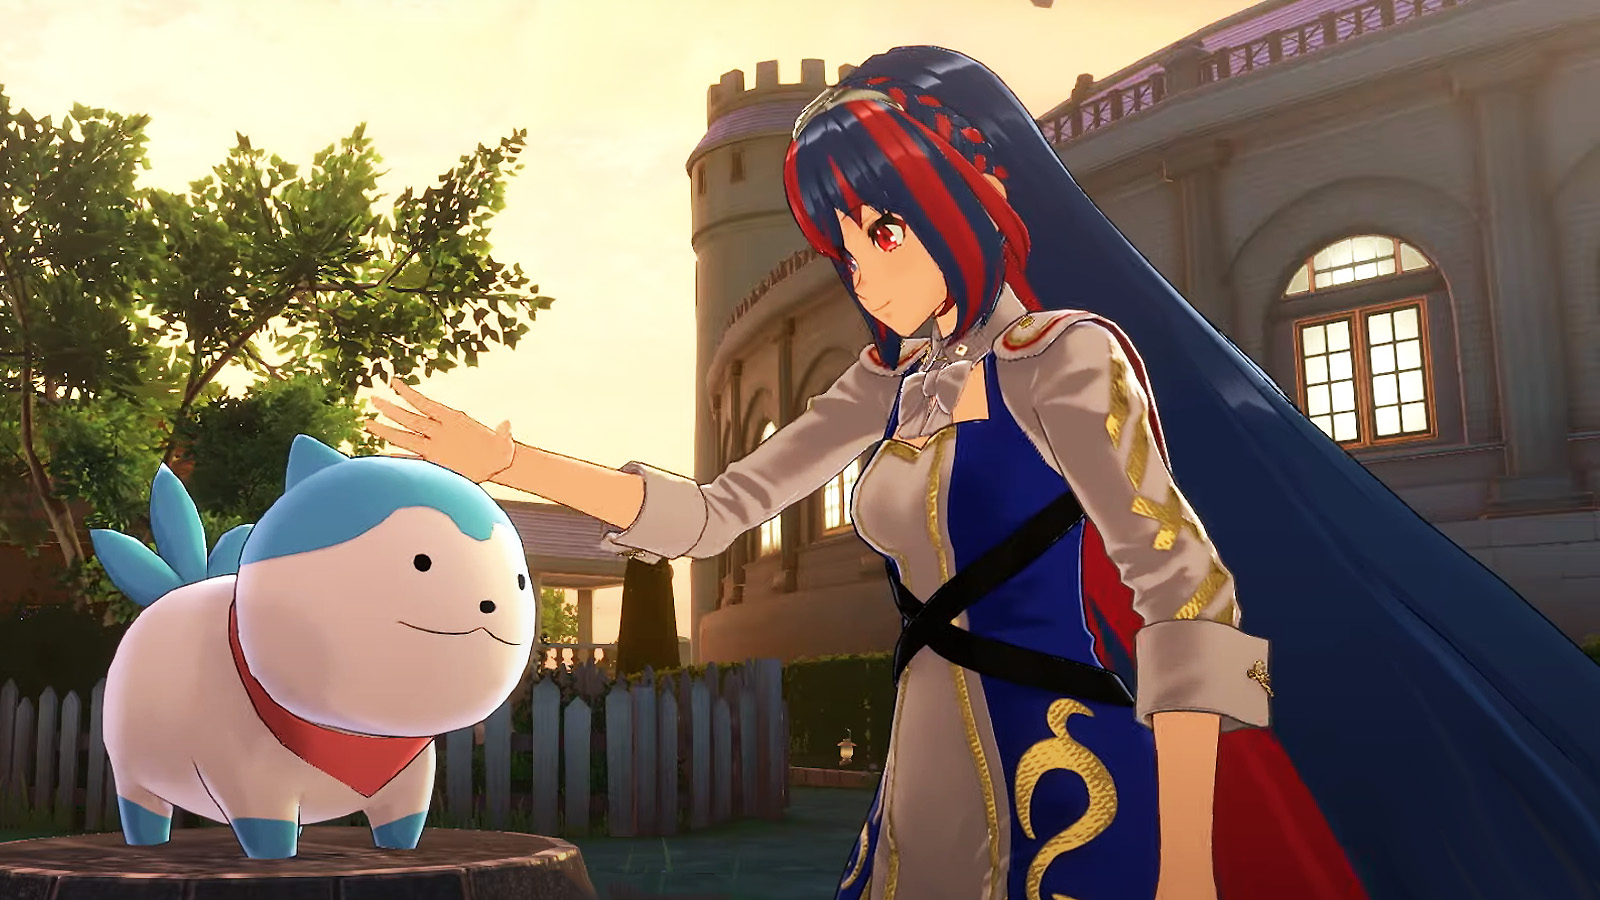 Fire Emblem Engage Shows Off its “Somniel” Home Base, Social Elements, Pet Collecting, More